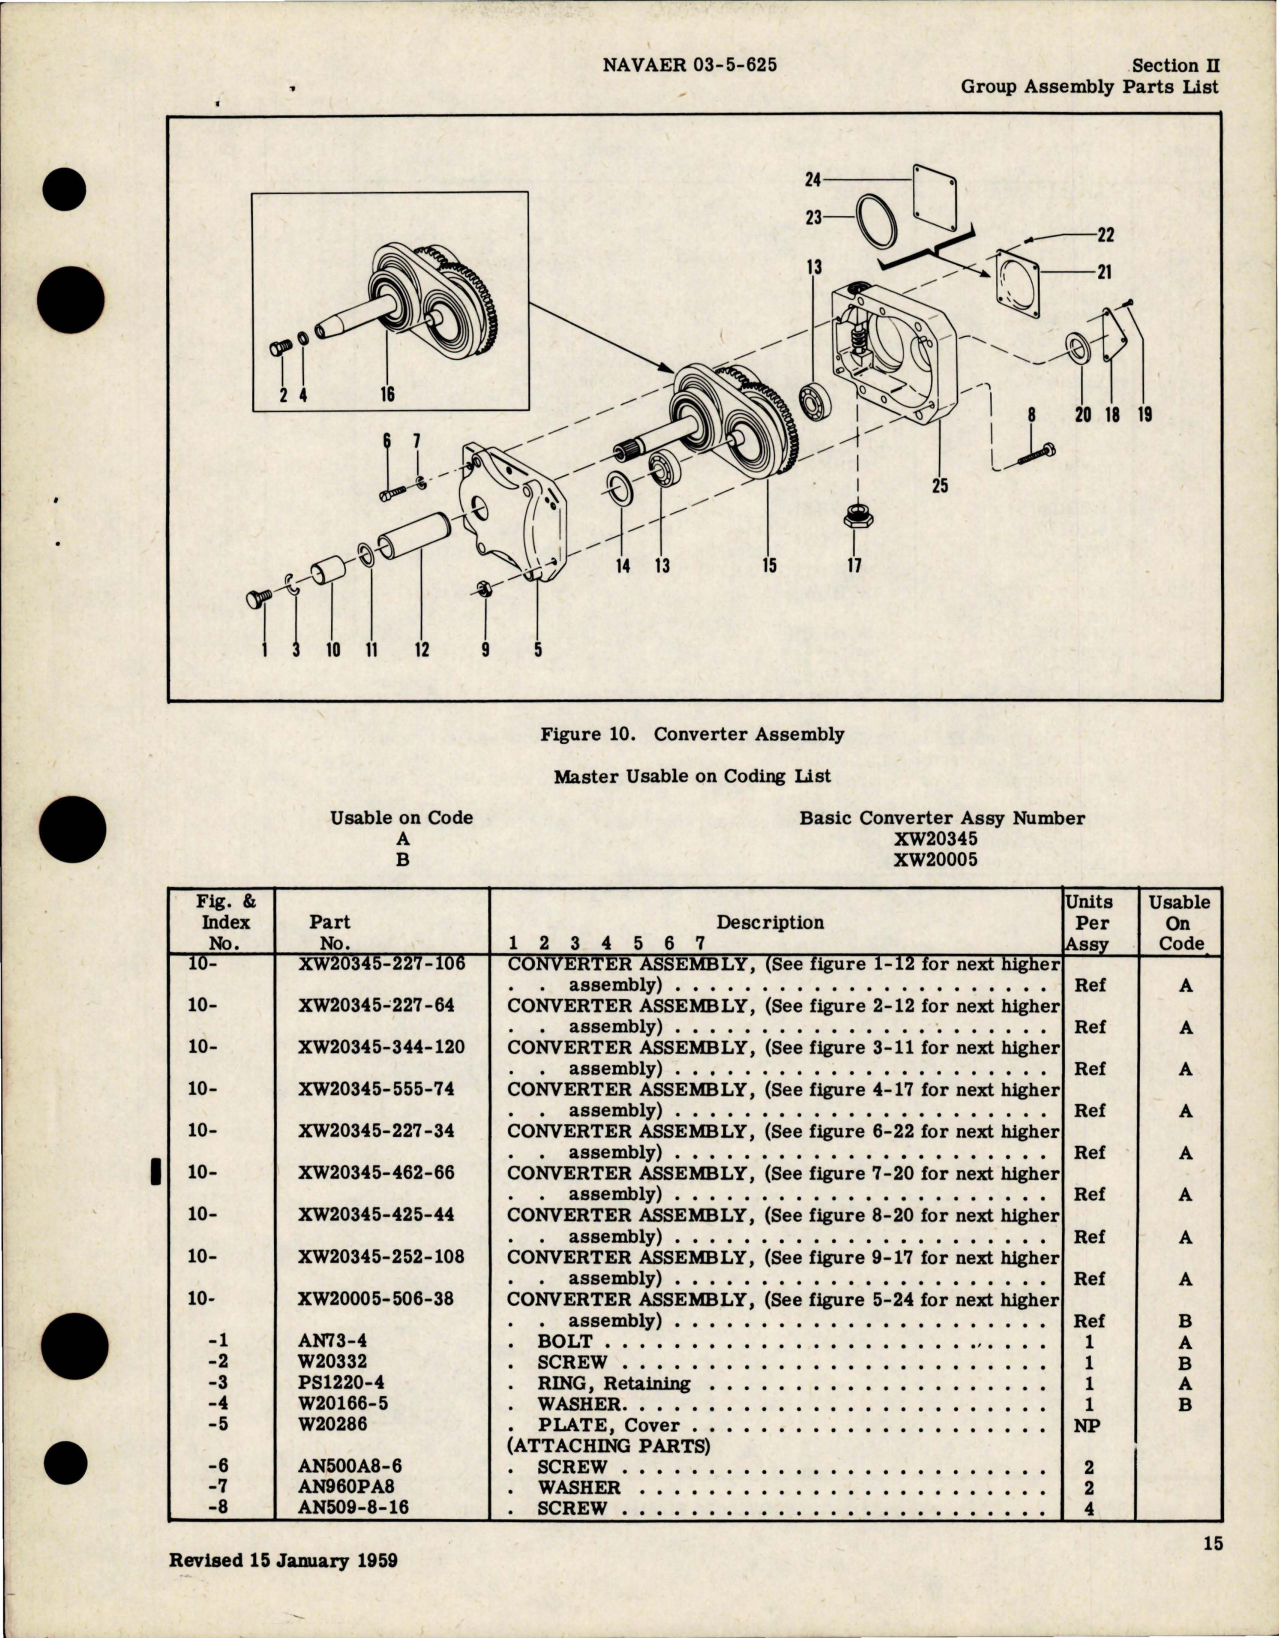 Sample page 5 from AirCorps Library document: Illustrated Parts Breakdown for Electric Windshield Wiper Systems XW20101 Series 